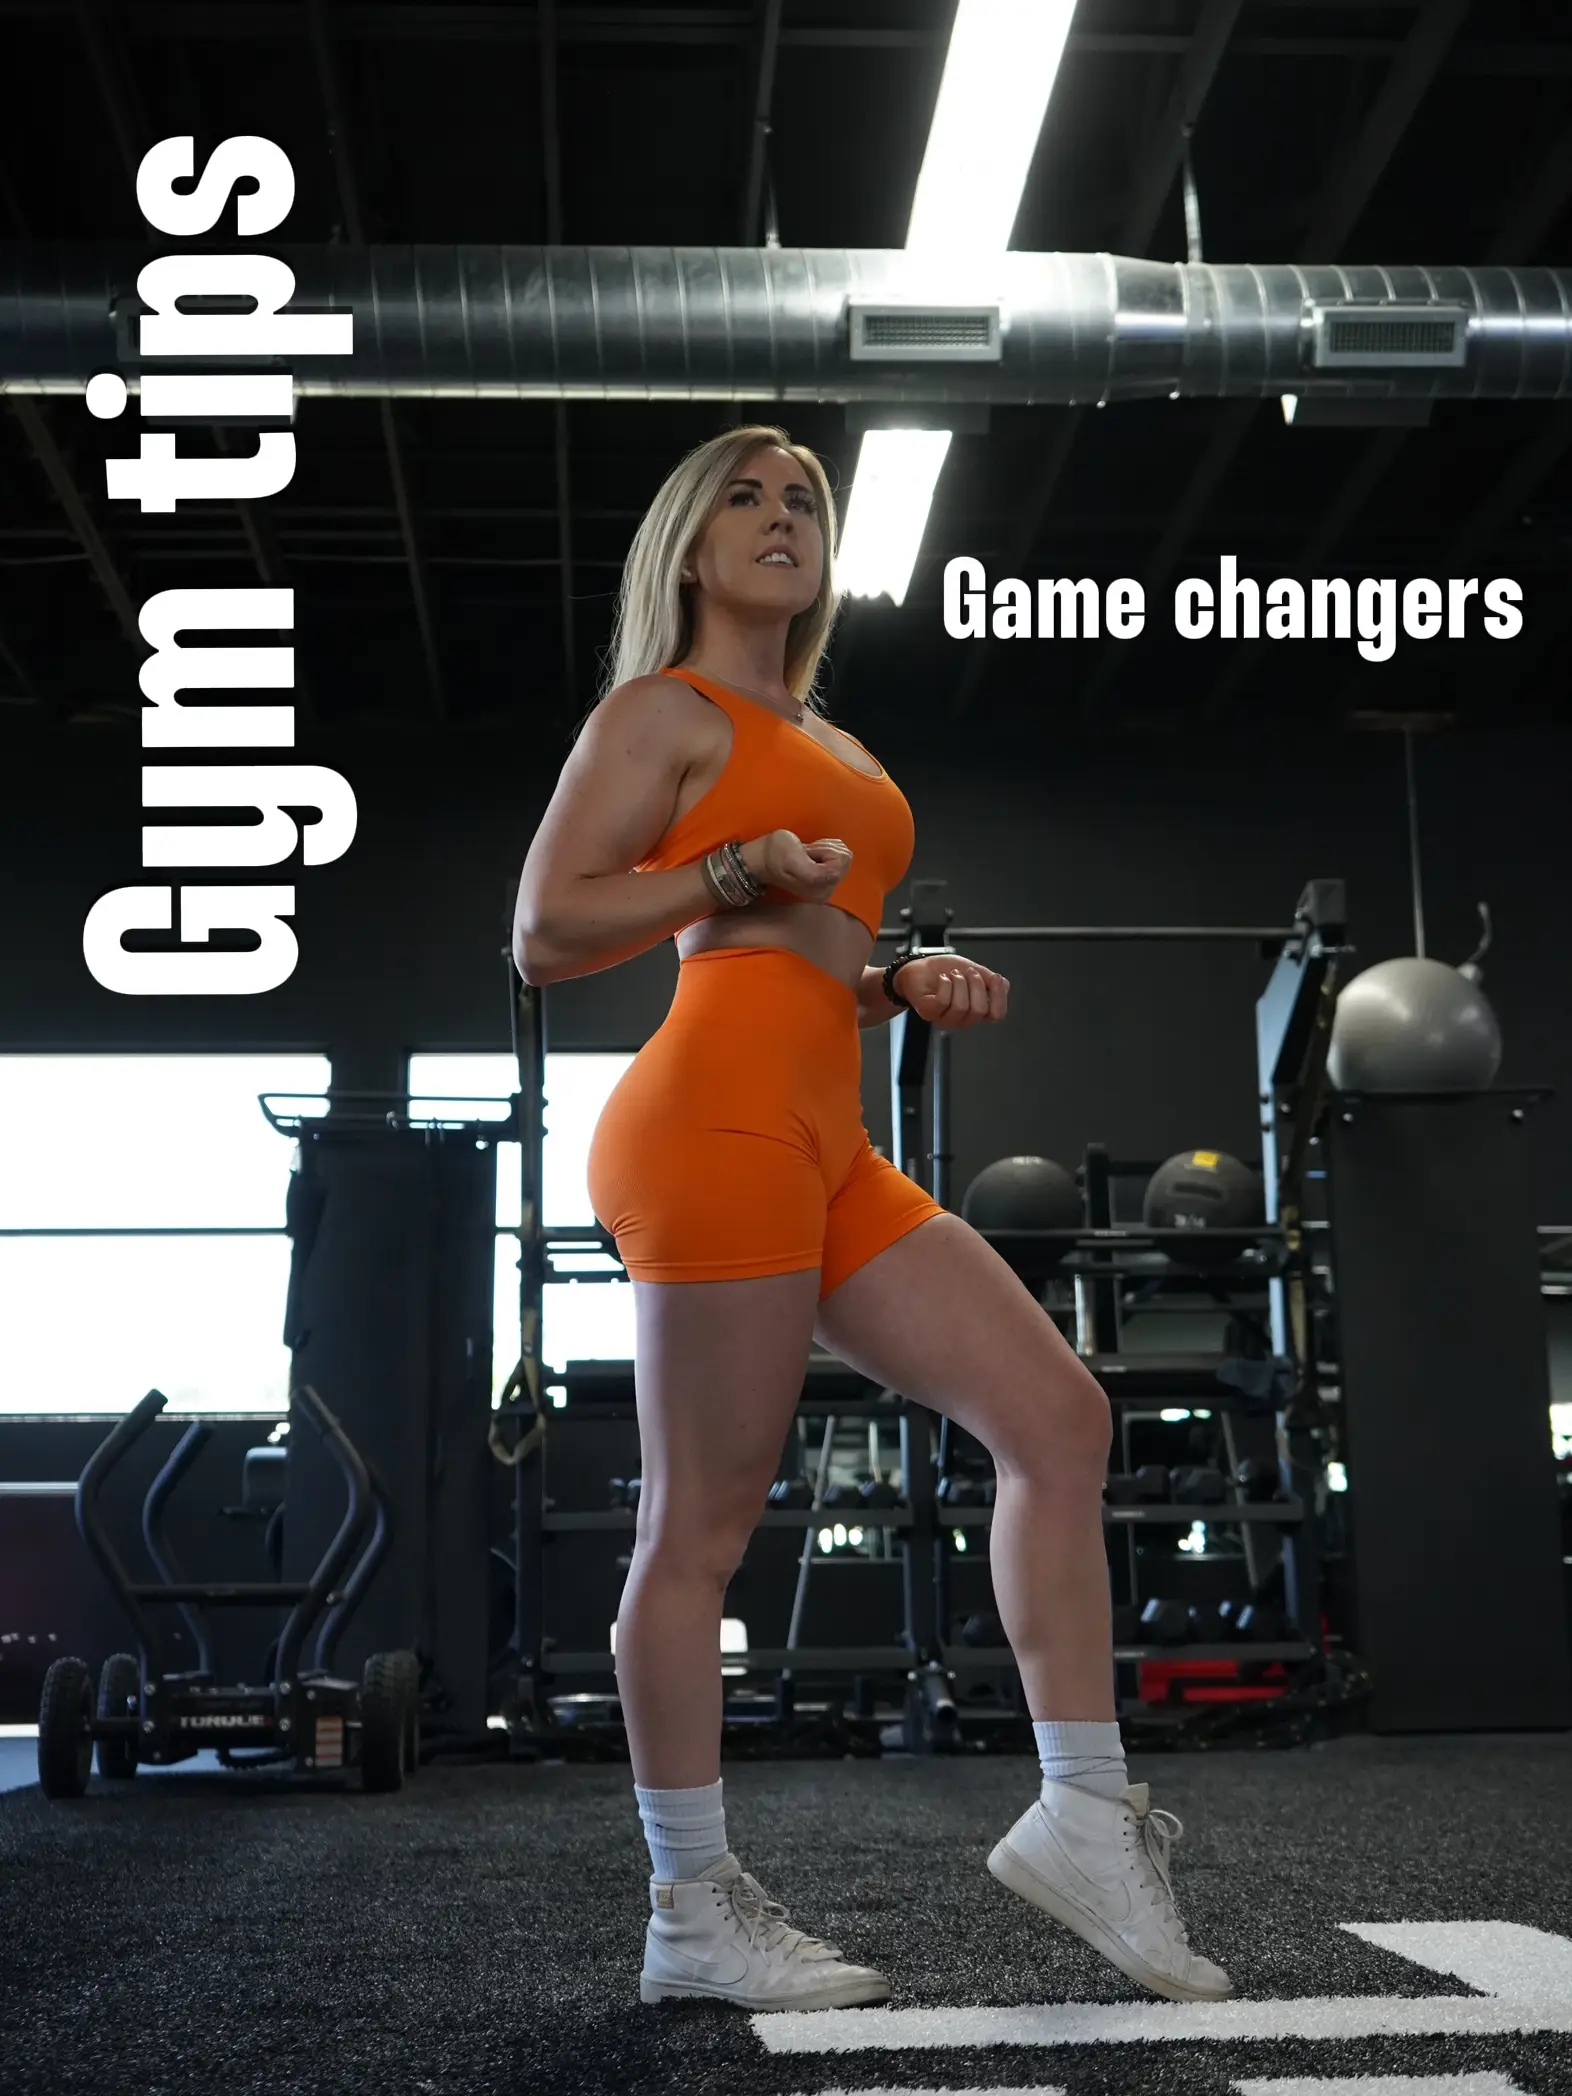 Lower body, glutes focused workout❤️‍🔥 + mind muscle connection is im